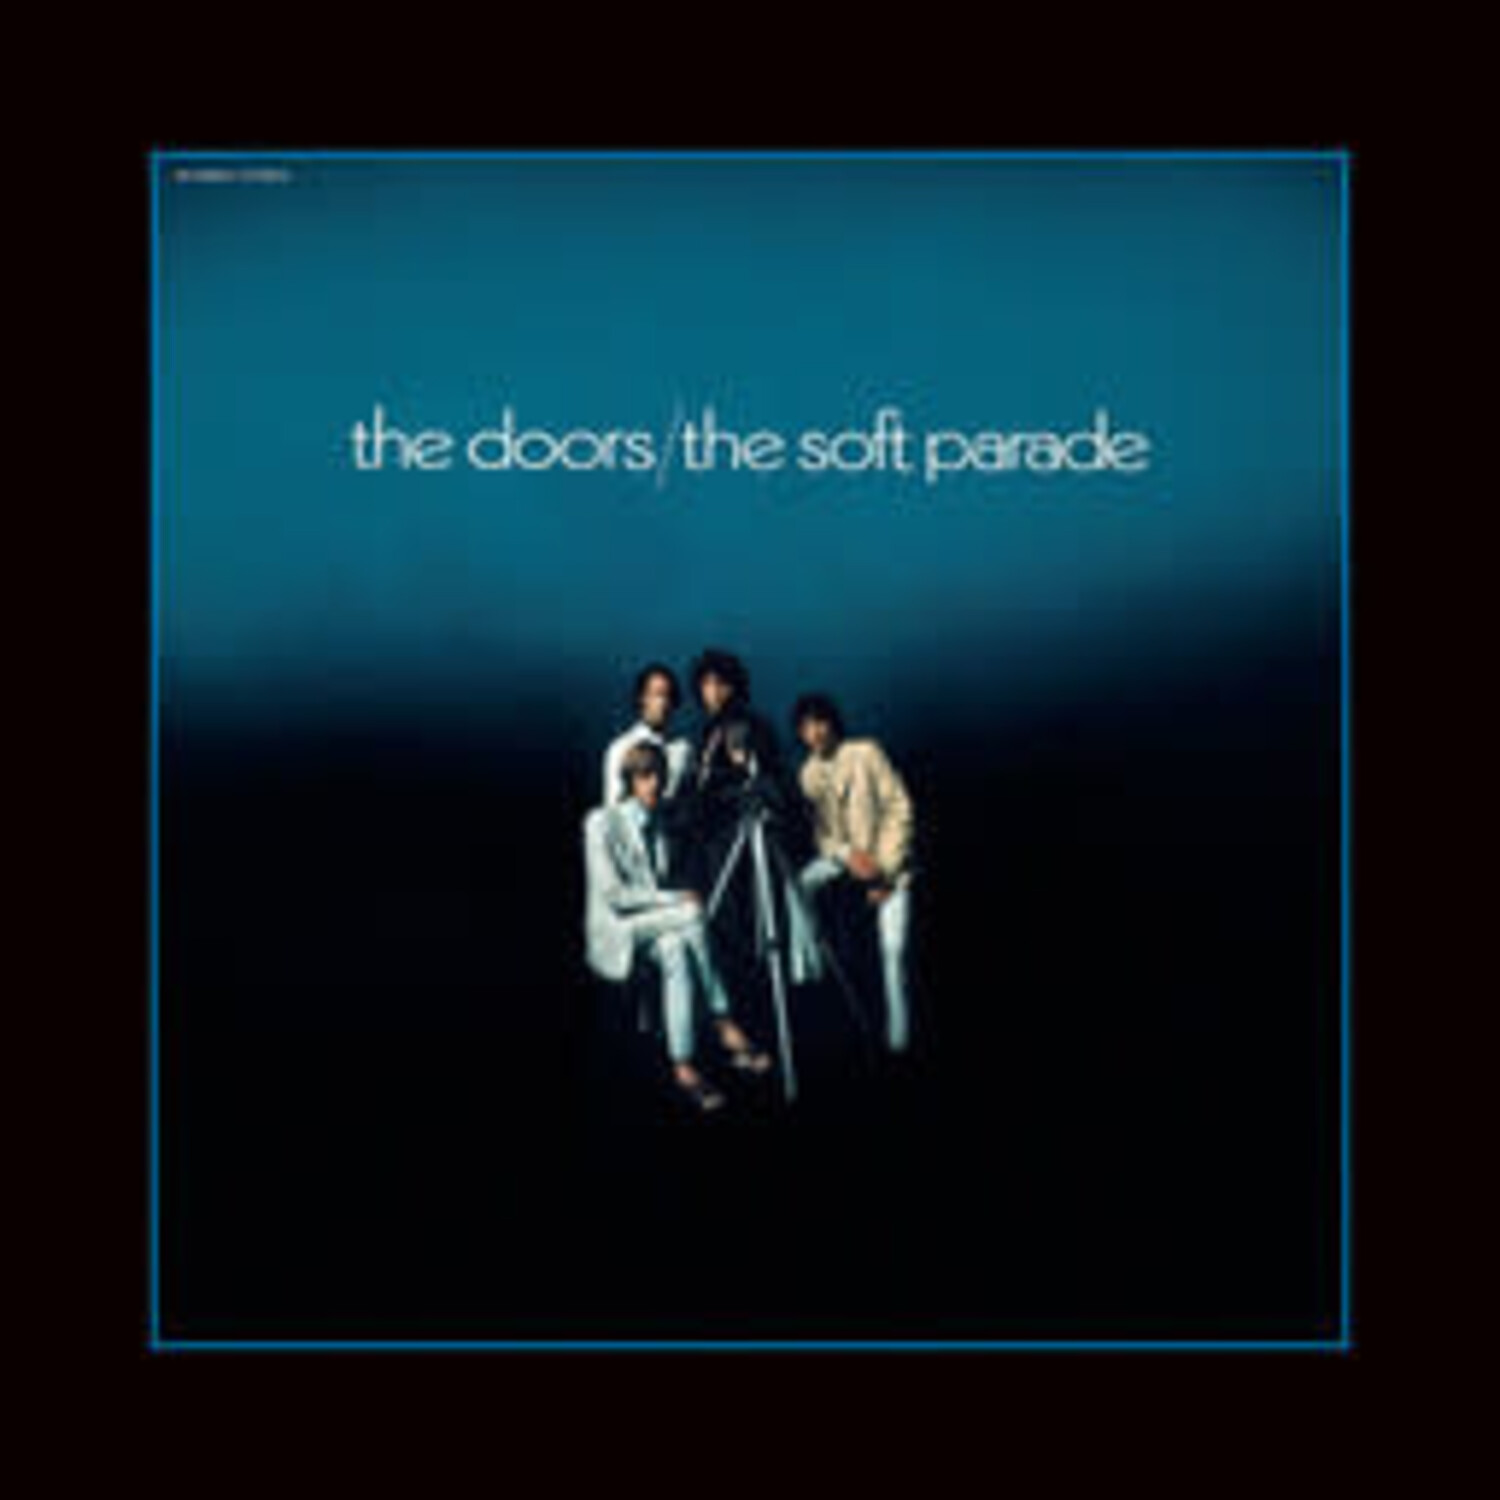 Doors, The - The Soft Parade LP (50th anniv. ed.) - Wax Trax Records